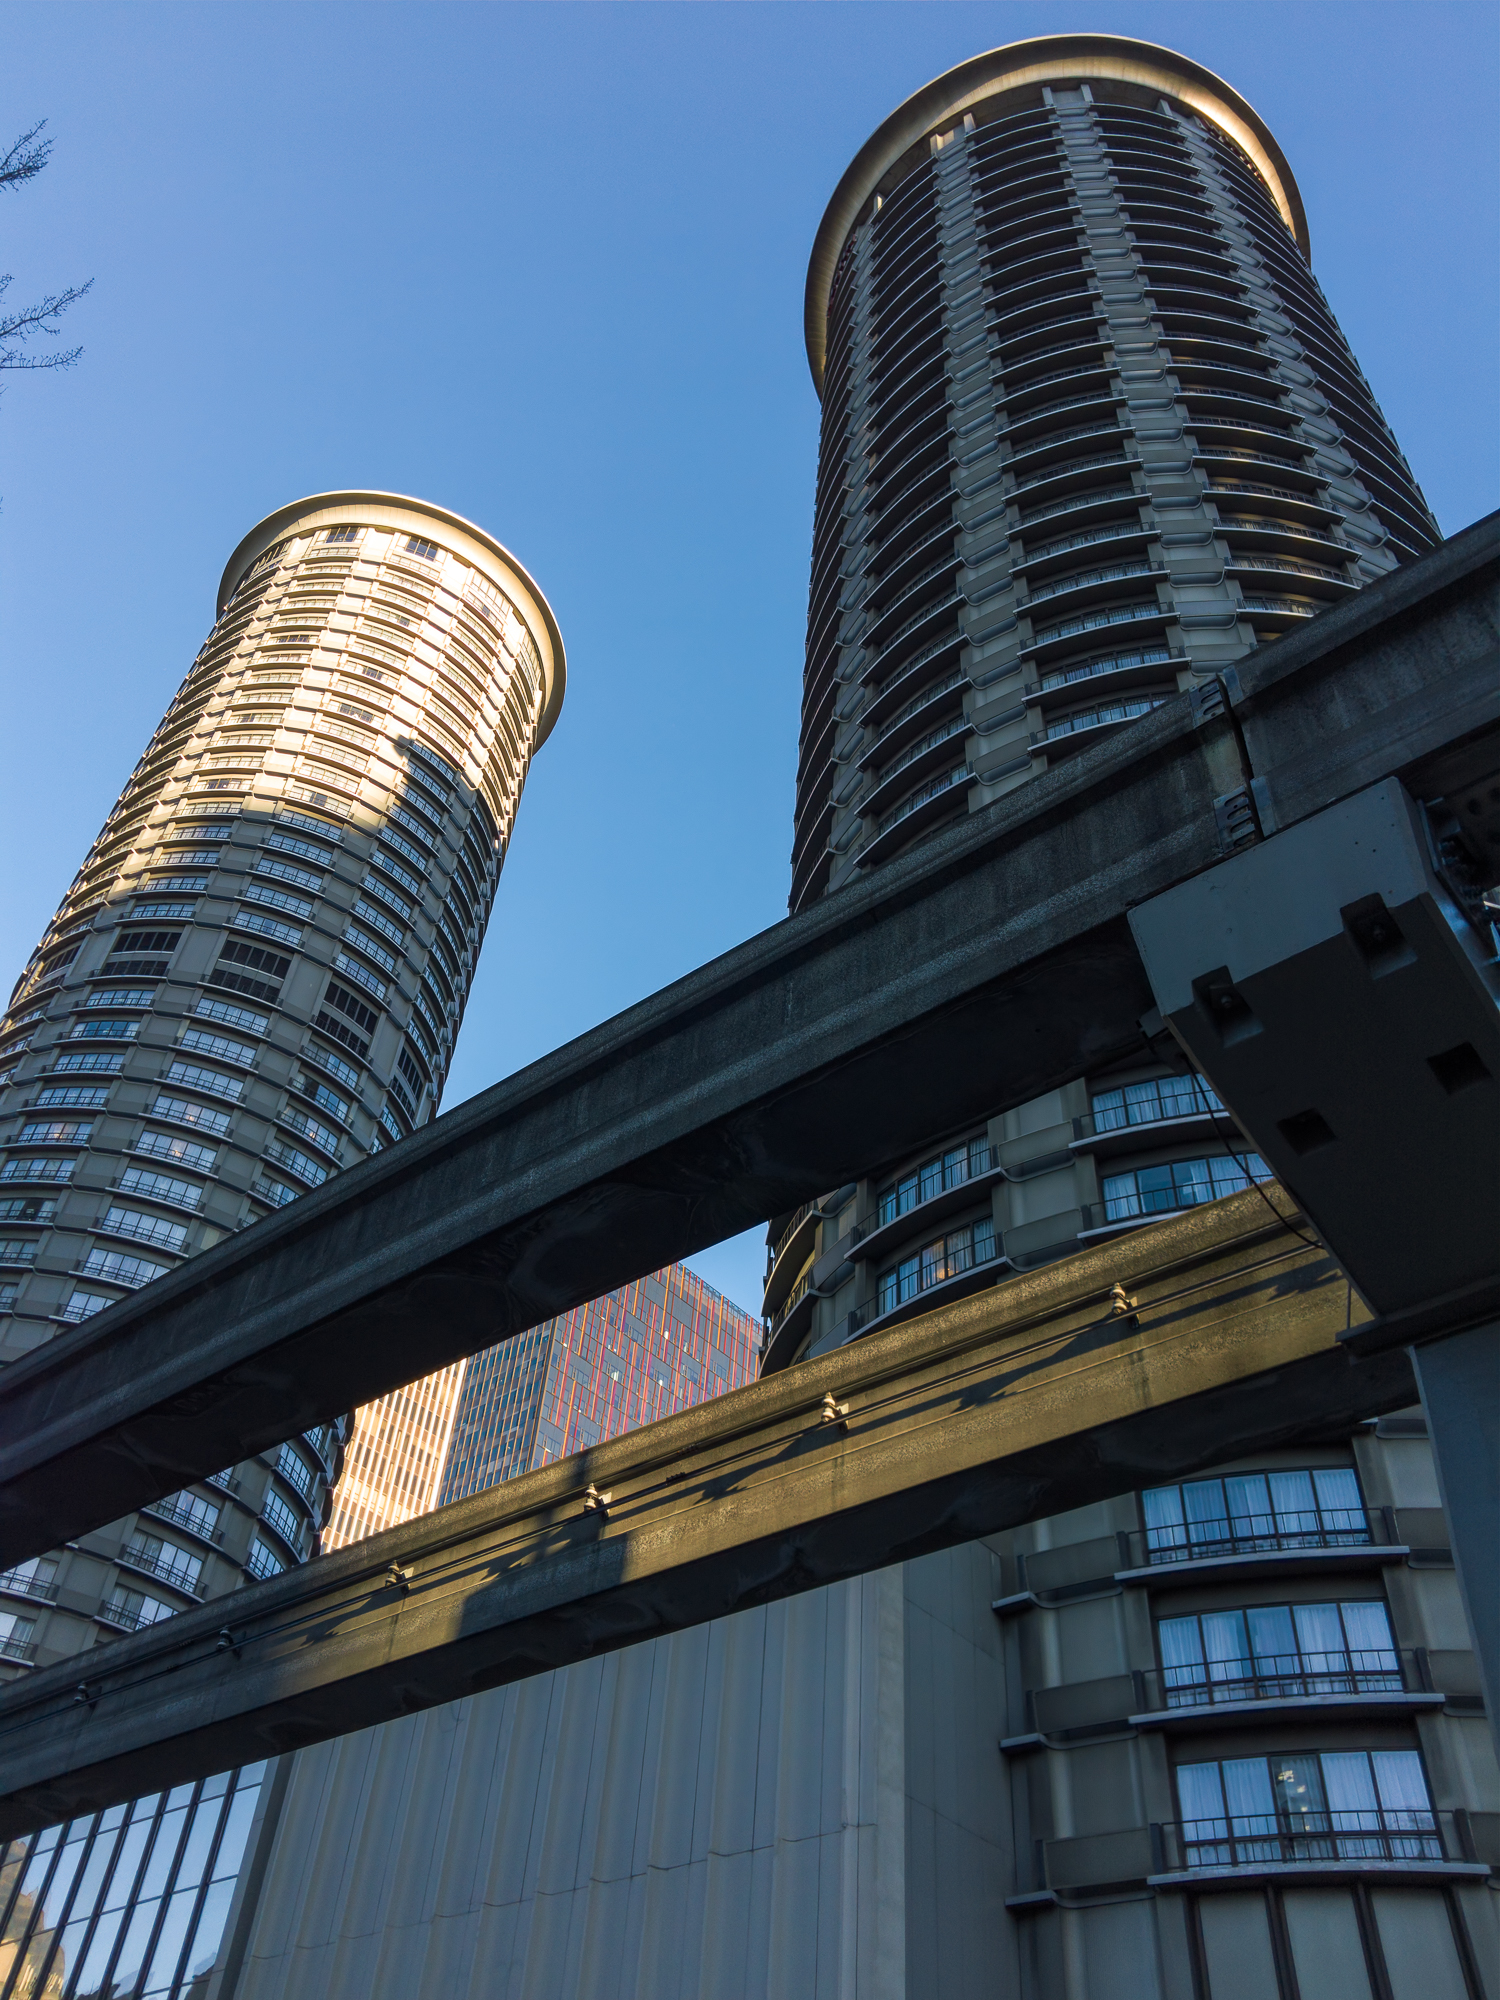 Monorail and Highrises - L16